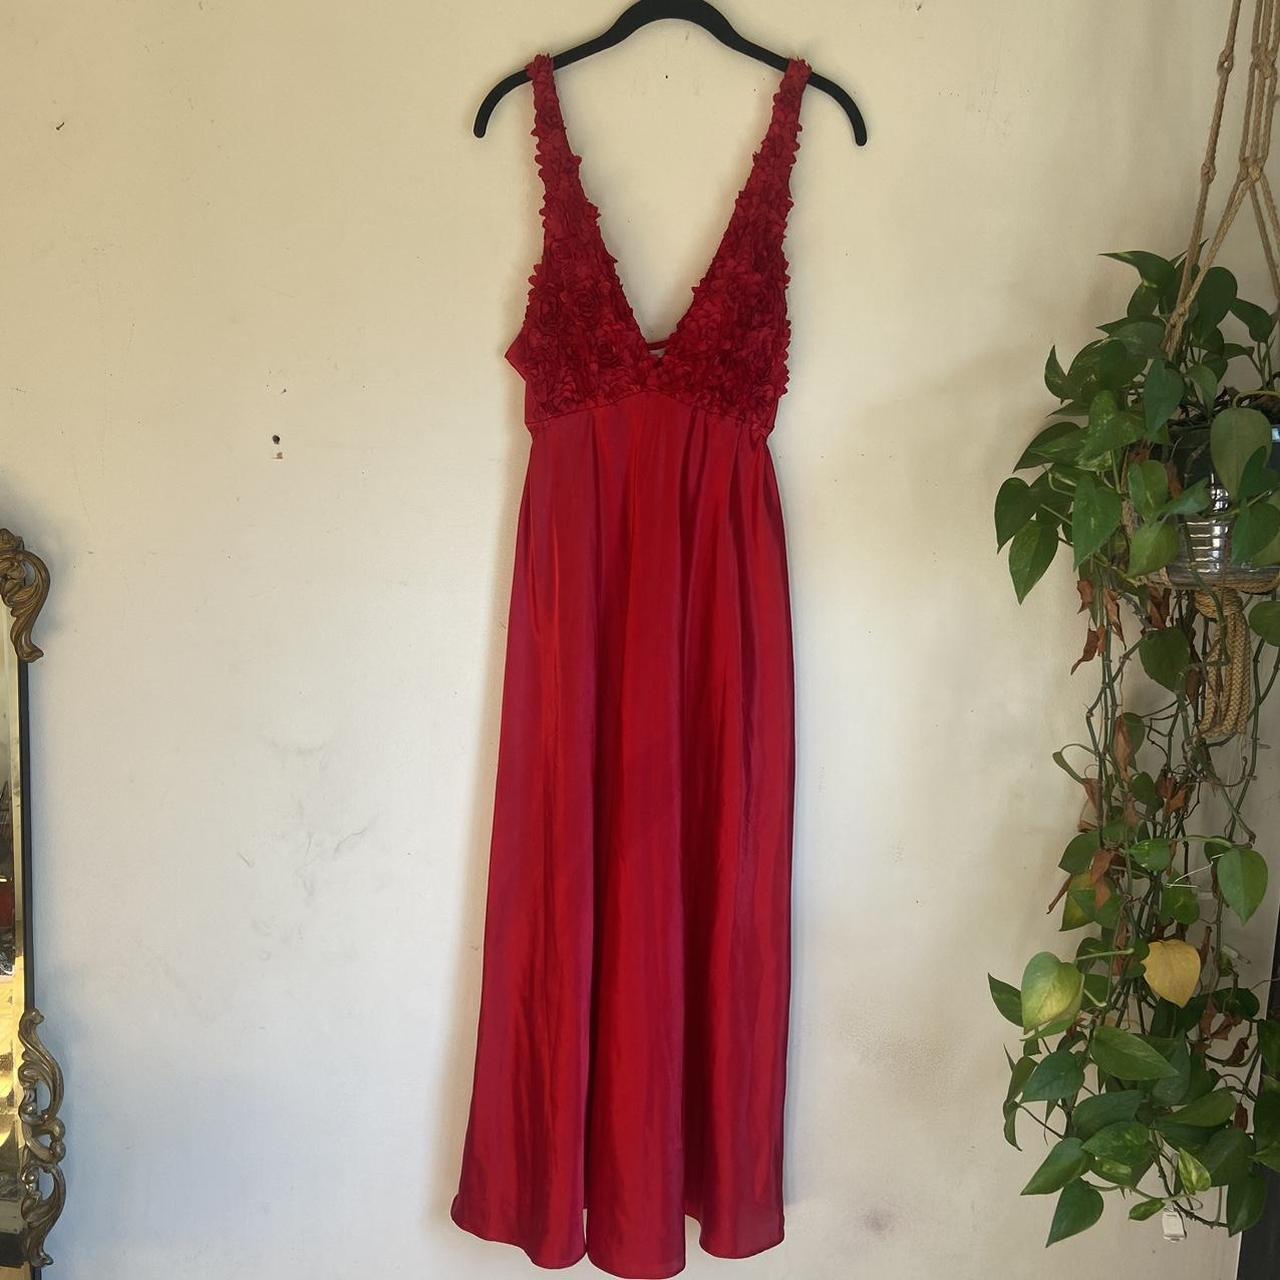 item listed by celestialsecondhand